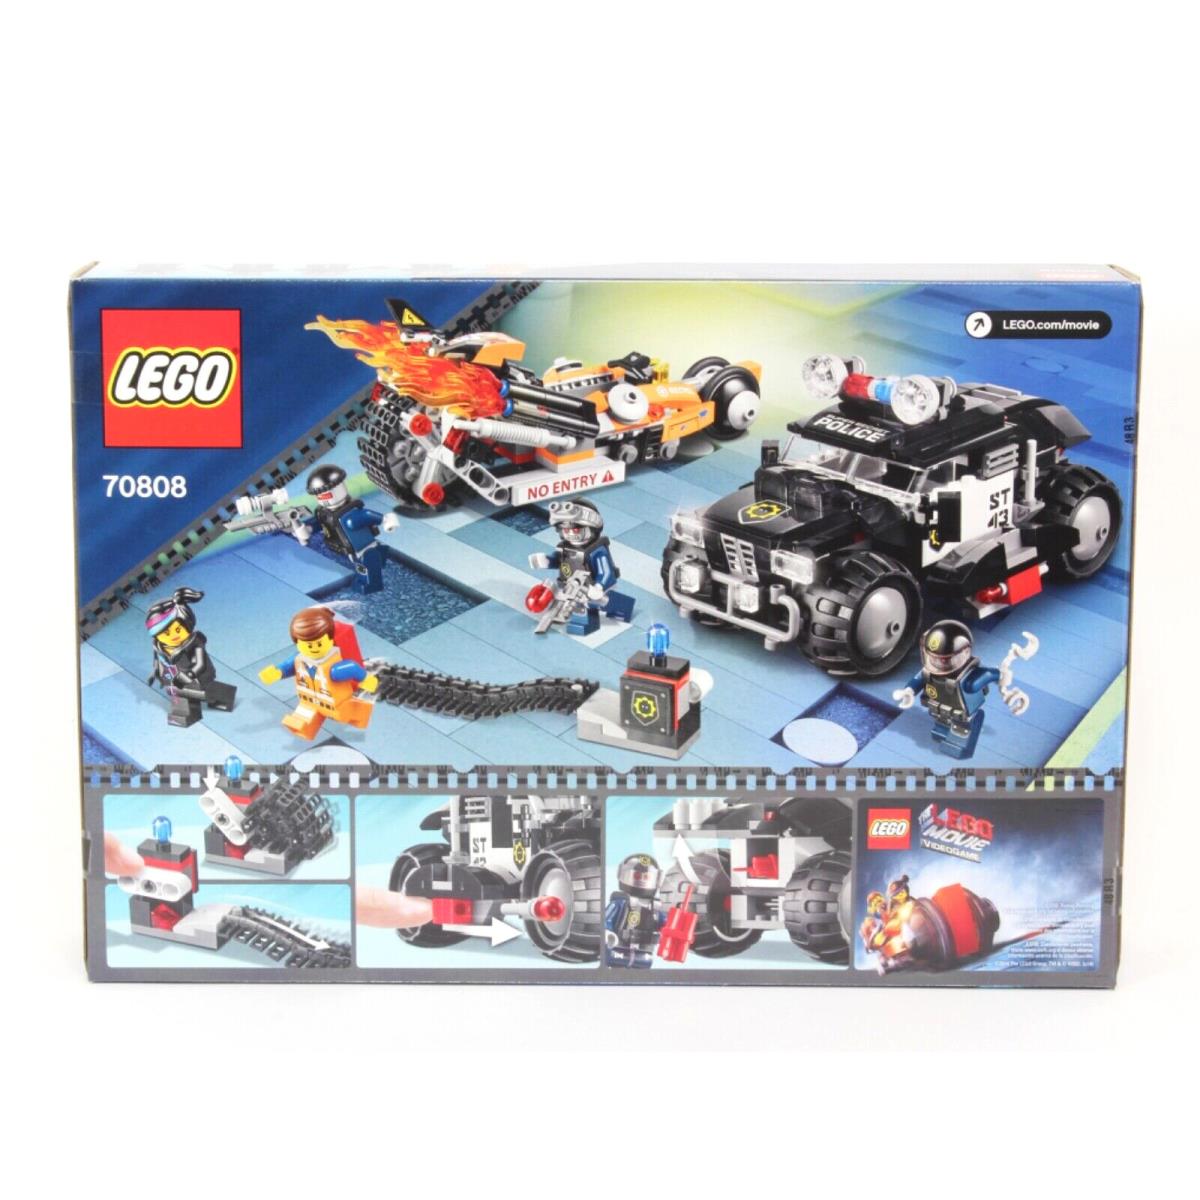 The Lego Movie Super Cycle Chase - Set 70808 Emmet Lucy Wyldstyle Robe Swat